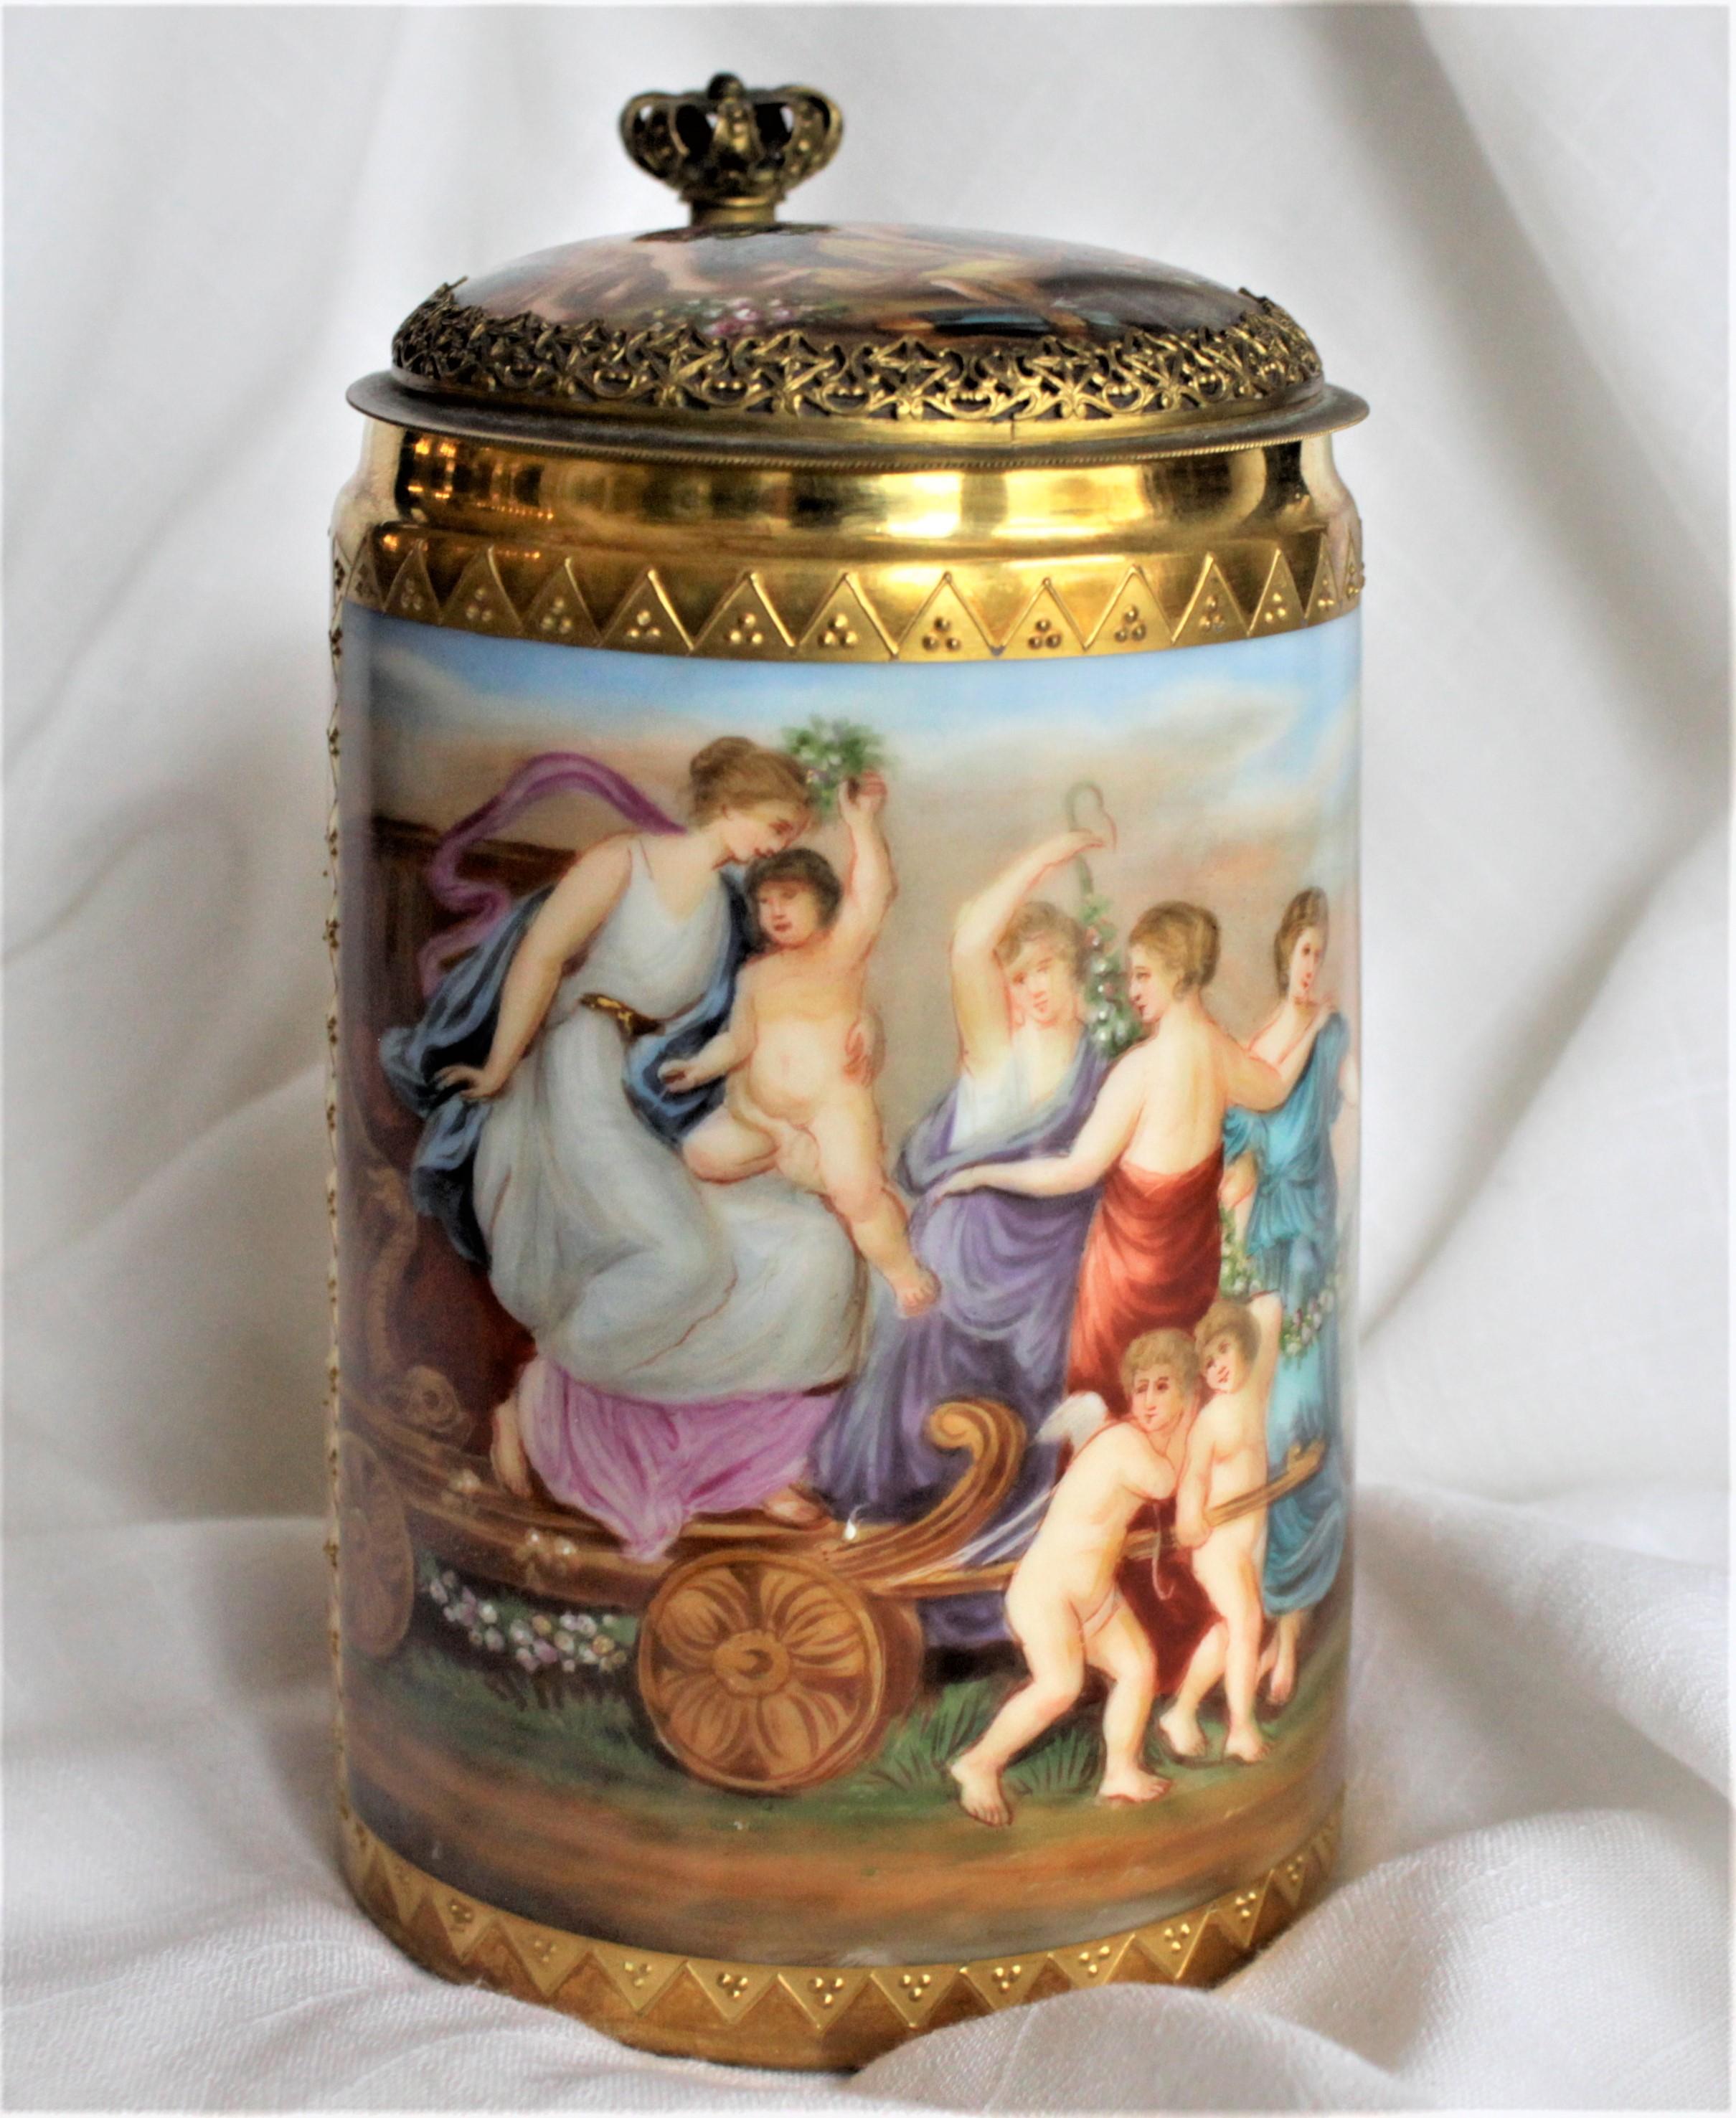 This antique and elaborately hand painted porcelain tankard is believed to have been made in Europe in circa 1880 in the neoclassical style of Royal Vienna. This covered stein has a highly detailed hand painted panel of the Wagon of Venus on the